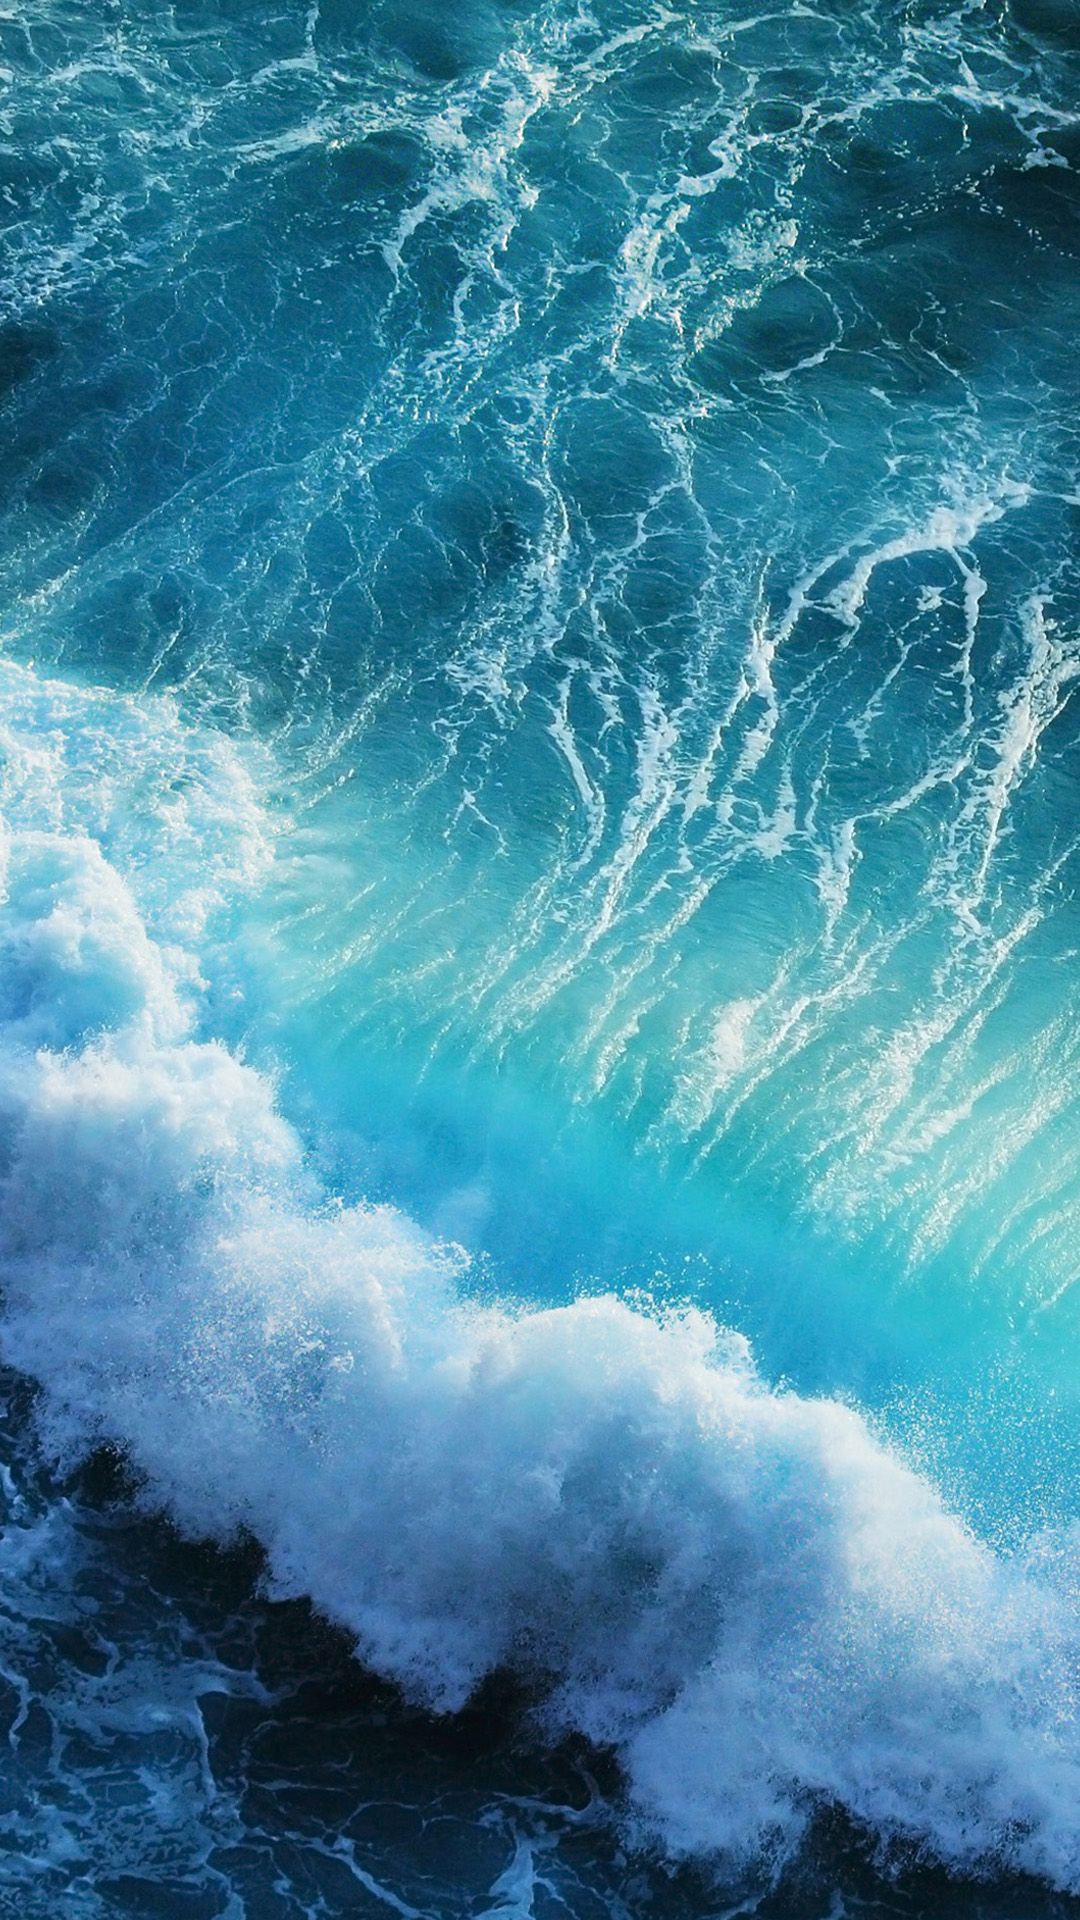 Blue sea water wallpapers for iphone 6 plus | Watery Wallpaper ...